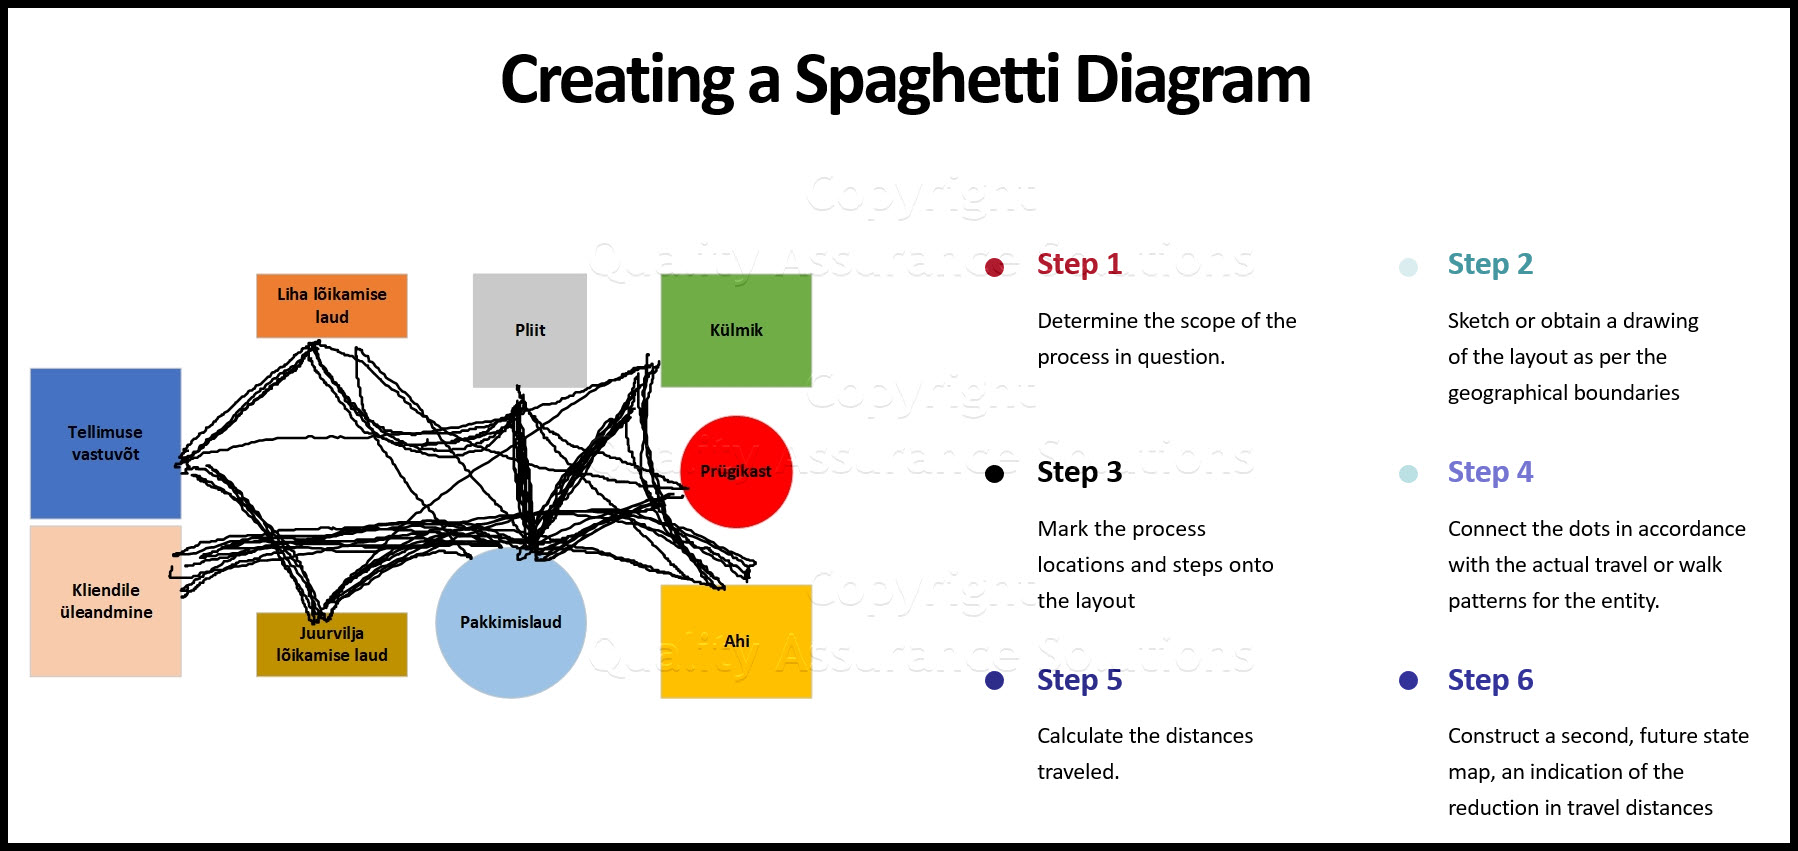 Spaghetti Map or Physical Process Map is the simplest Lean Sigma tool. It demonstrates the physical flow of an entity or multiple entity types